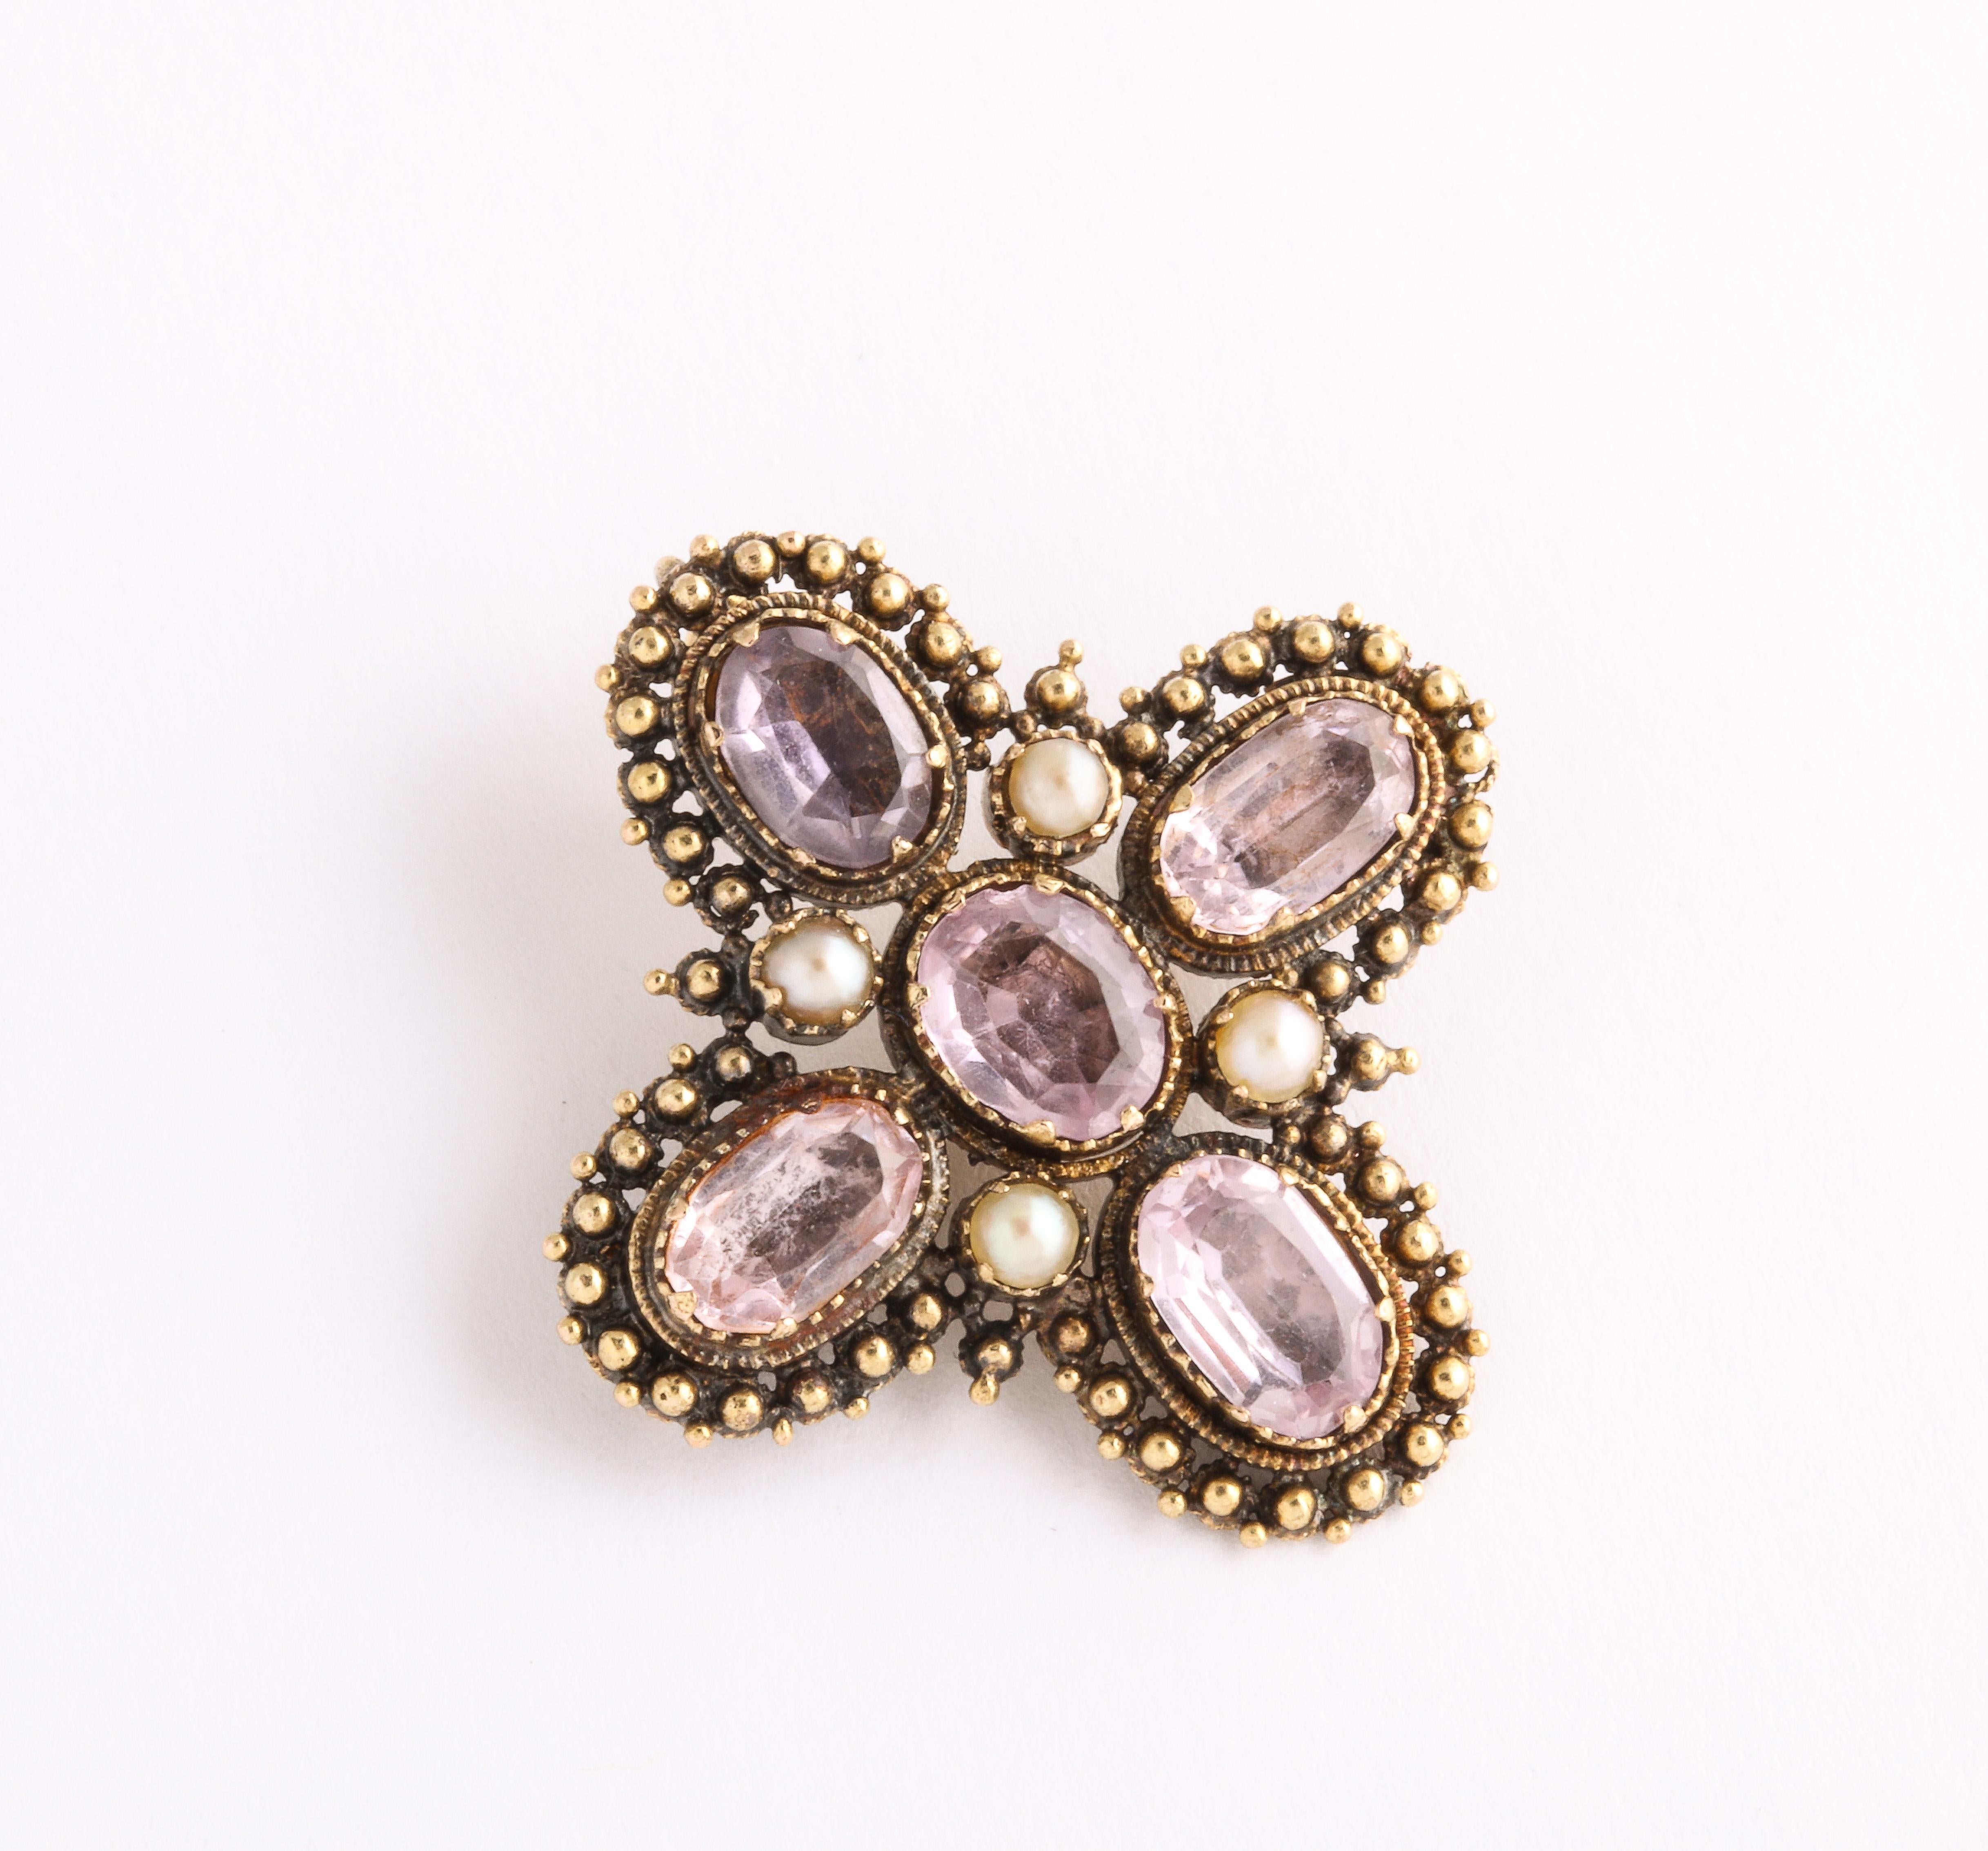 A beautifully granulated pale amethyst and 18 kt gold pendant or brooch that is set with four natural pearls around the center stone. The gems are closed in the back and foiled. The gold does not overpower the amethysts and the granulation gives the